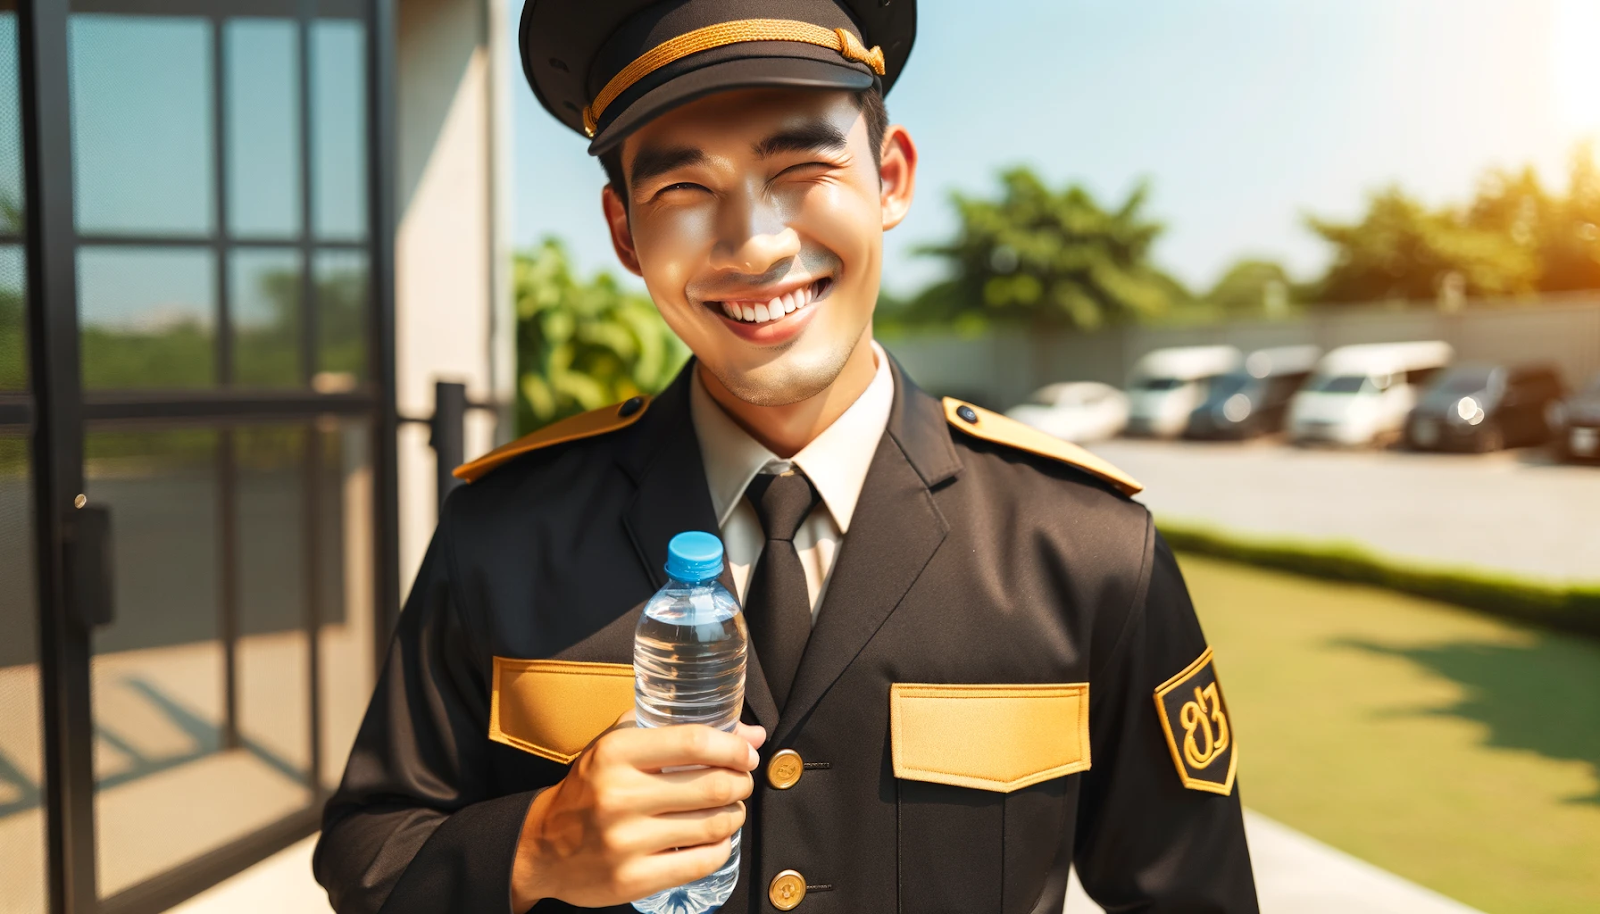 A cheerful security guard in black and gold uniform stands in the shade, holding a water bottle, illustrating heat stress prevention measures.